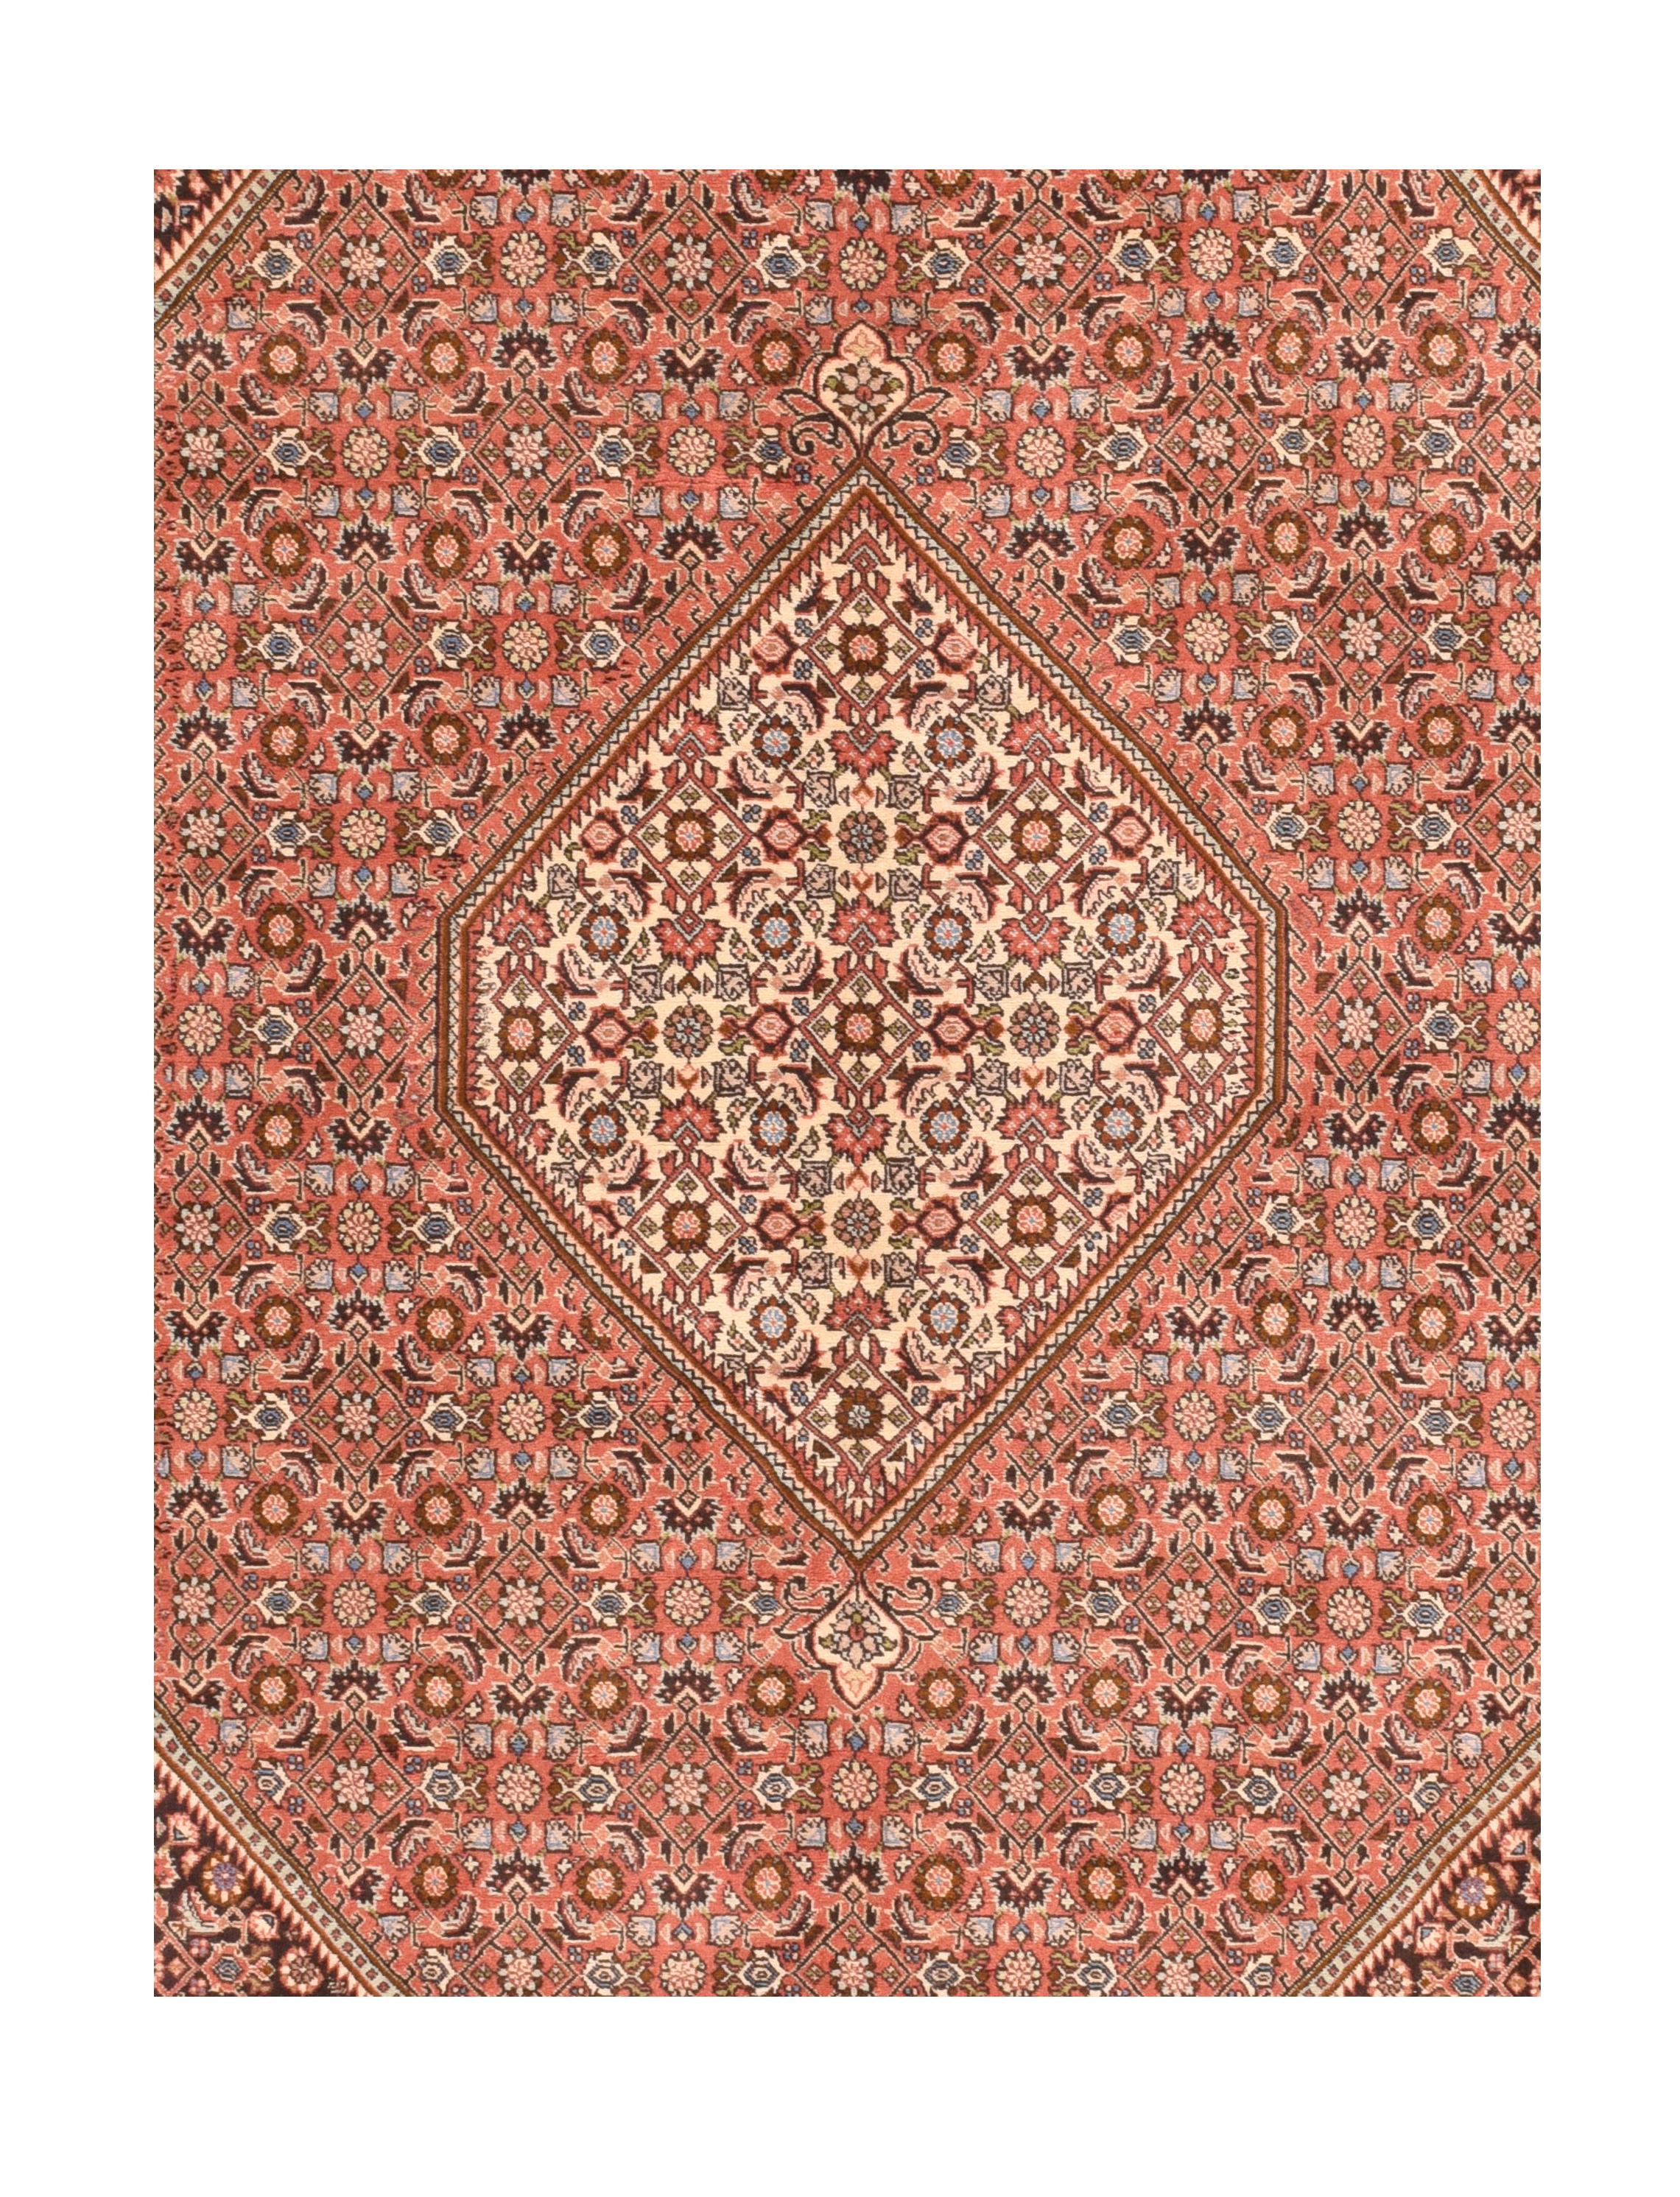 Fine vintage Bidjar Persian rug, hand knotted, circa 1970s

Design: Diamonds

Bidjar is the name of a small Kurdish town in western Iran. Kurdish carpets are often very strong and compact, which makes them extremely durable. The name Bidjar